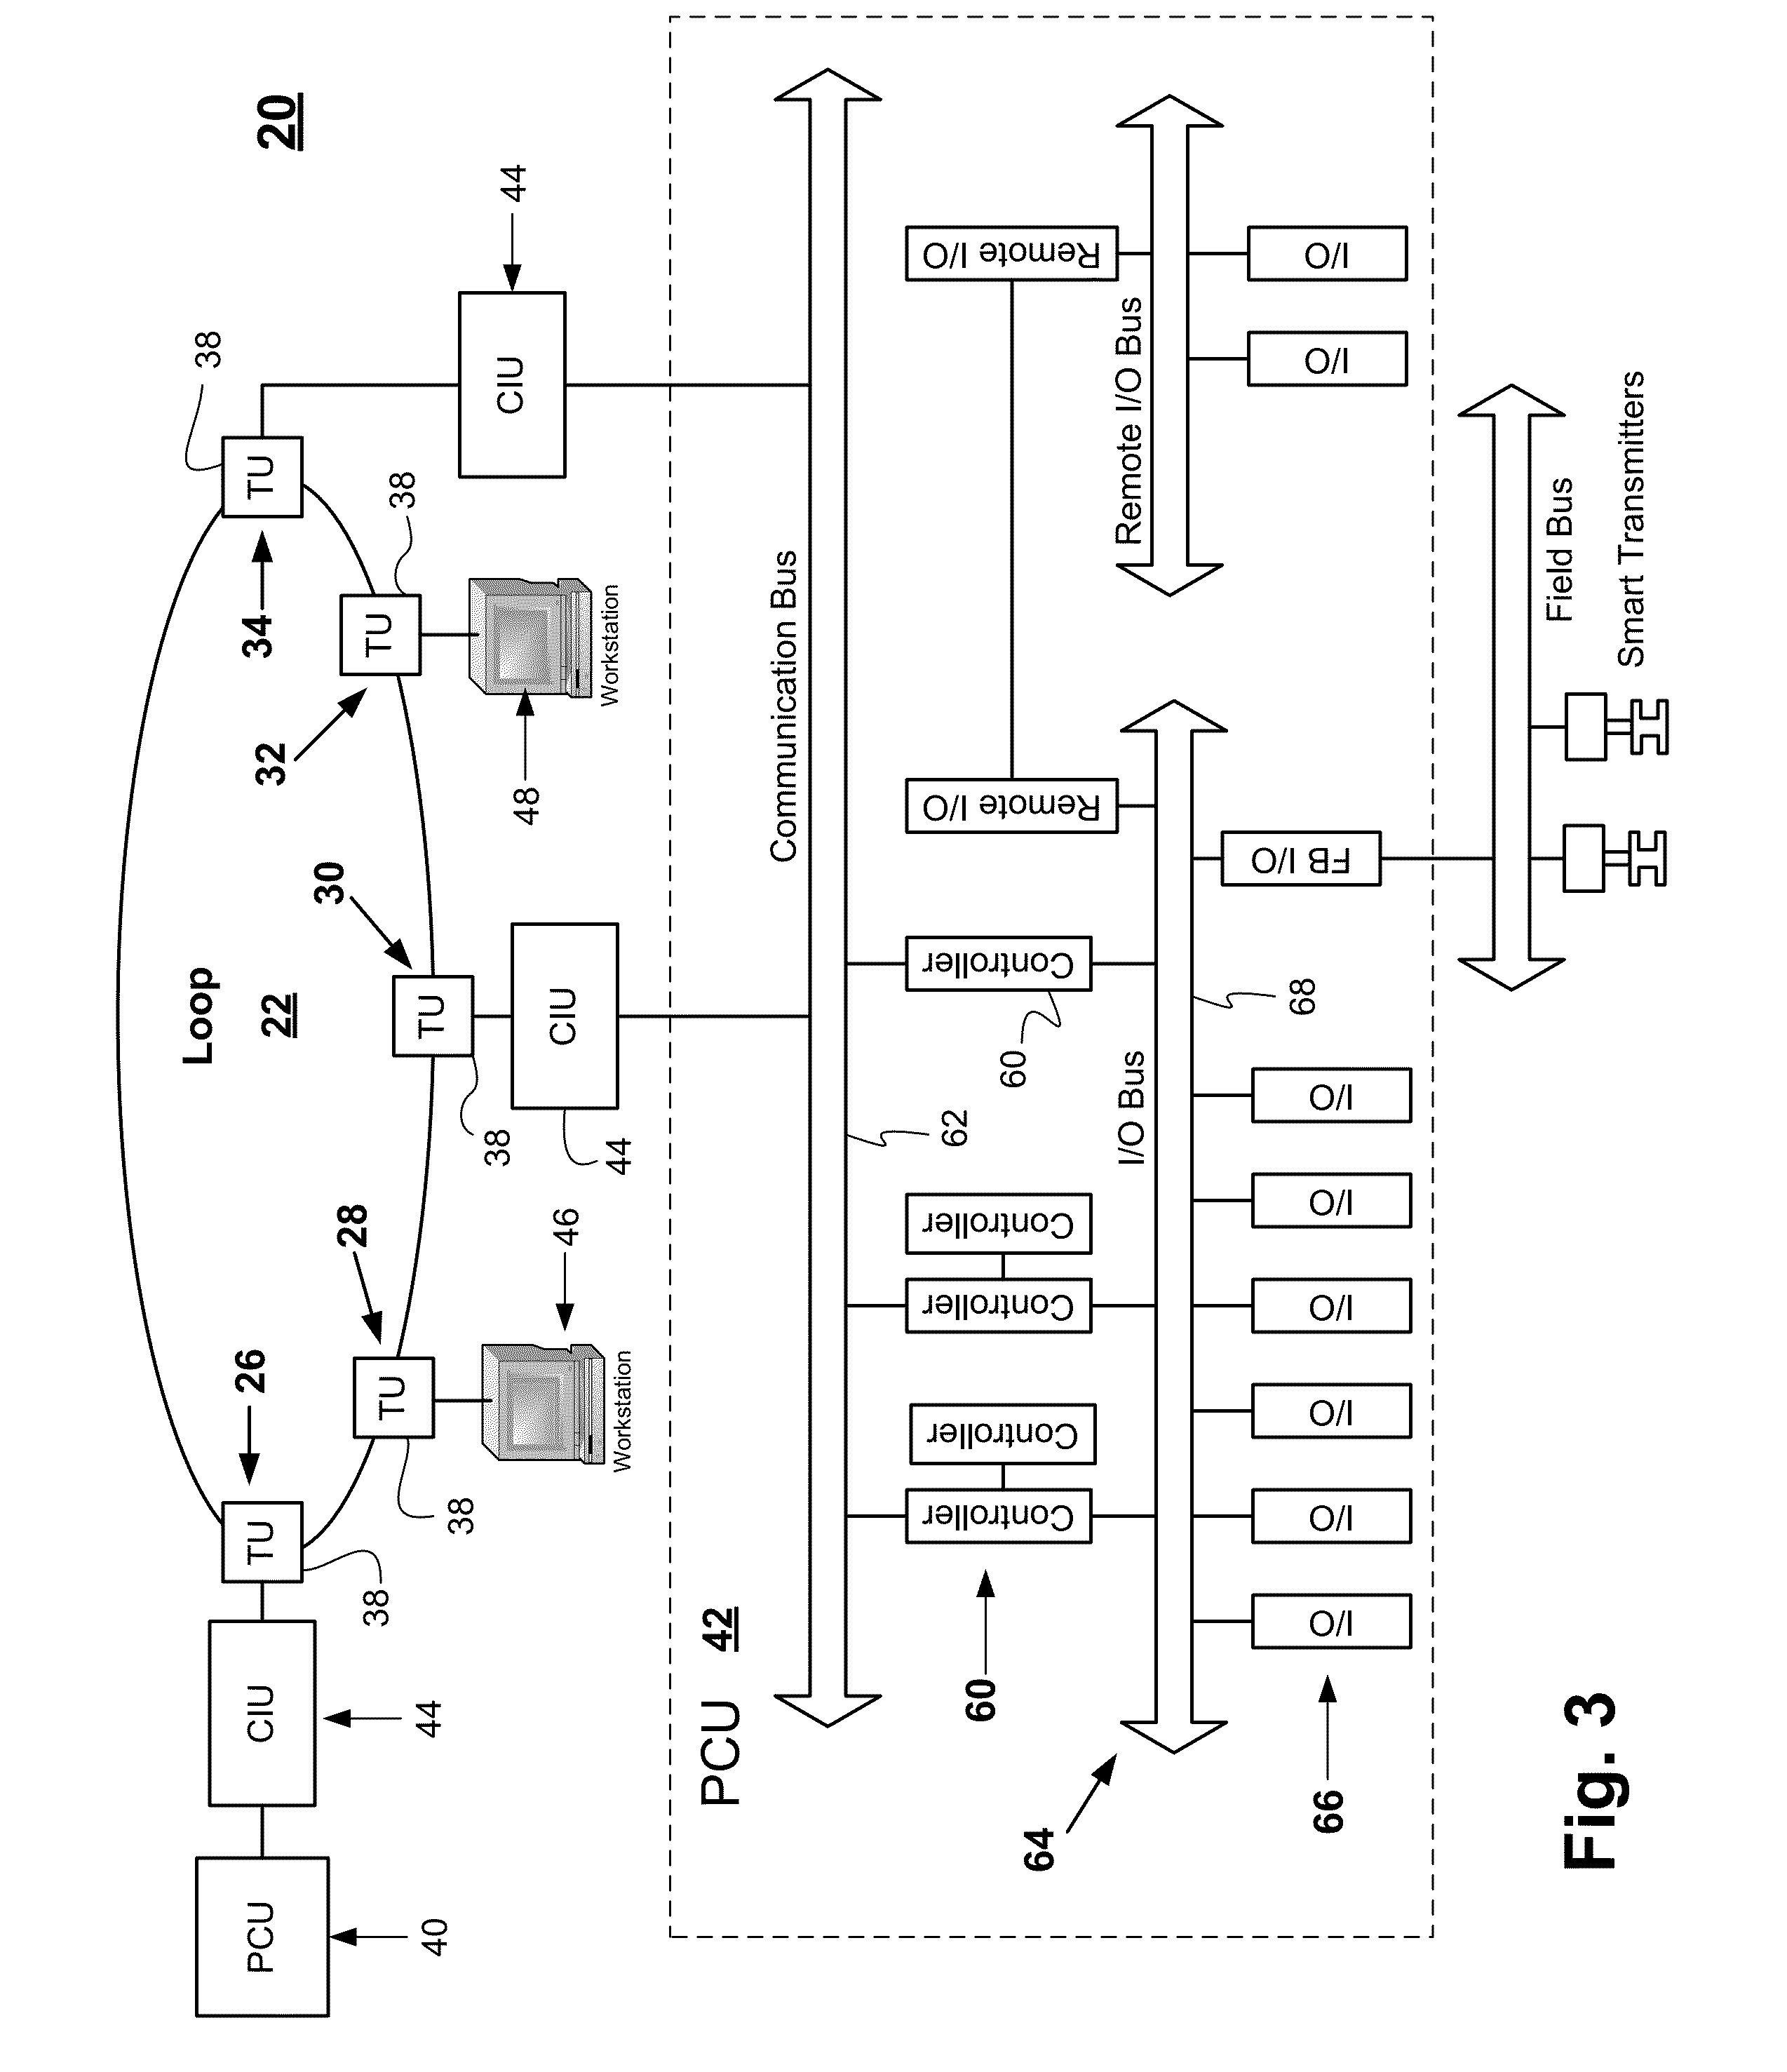 Method for analyzing and diagnosing large scale process automation control systems